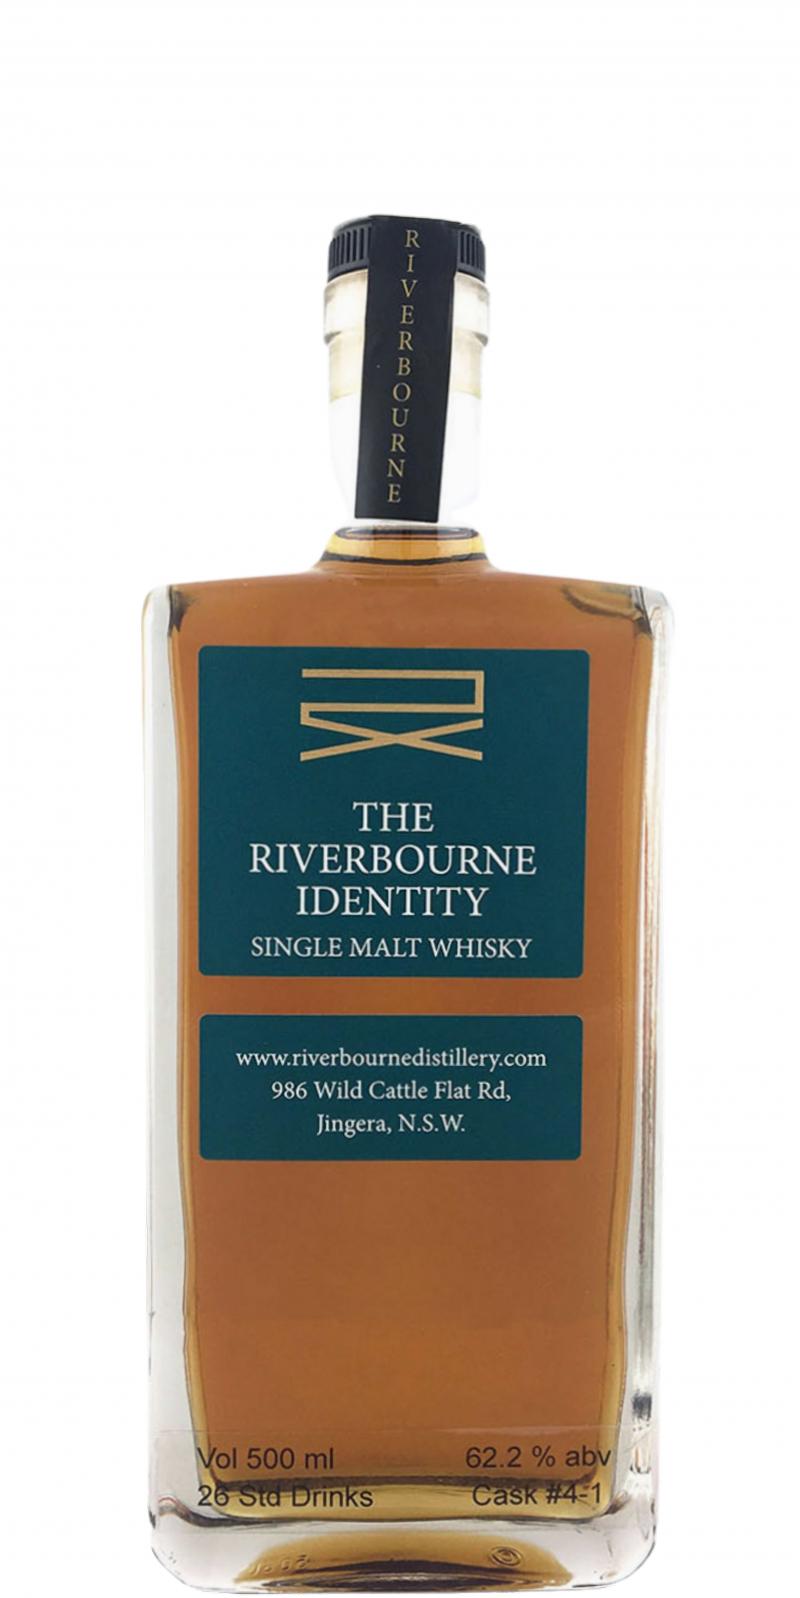 The Riverbourne Identity